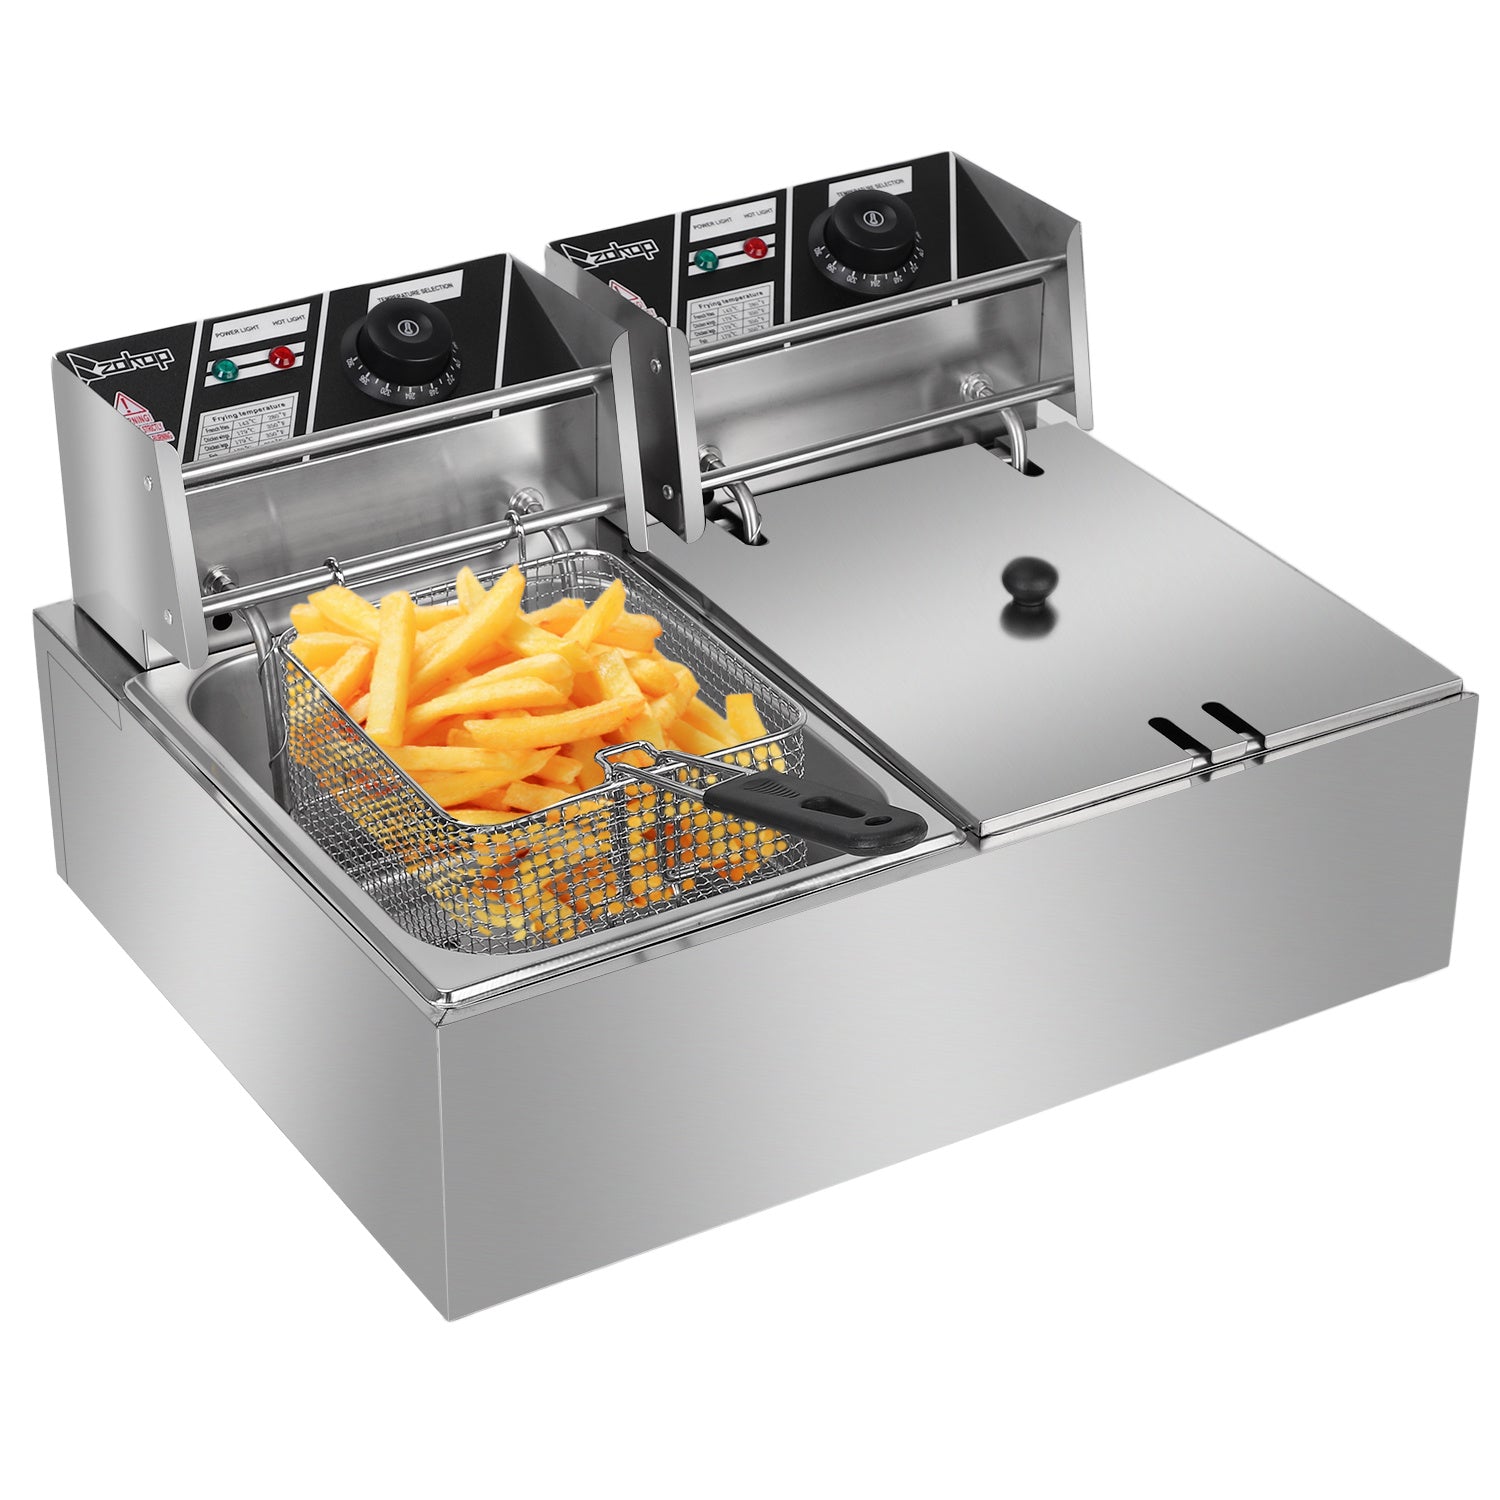 Deep Fryer 12.7QT/12L Stainless Steel Double Cylinder Electric Fryer with Baskets Filters,Electric Fryer for Turkey,French Fries,Donuts